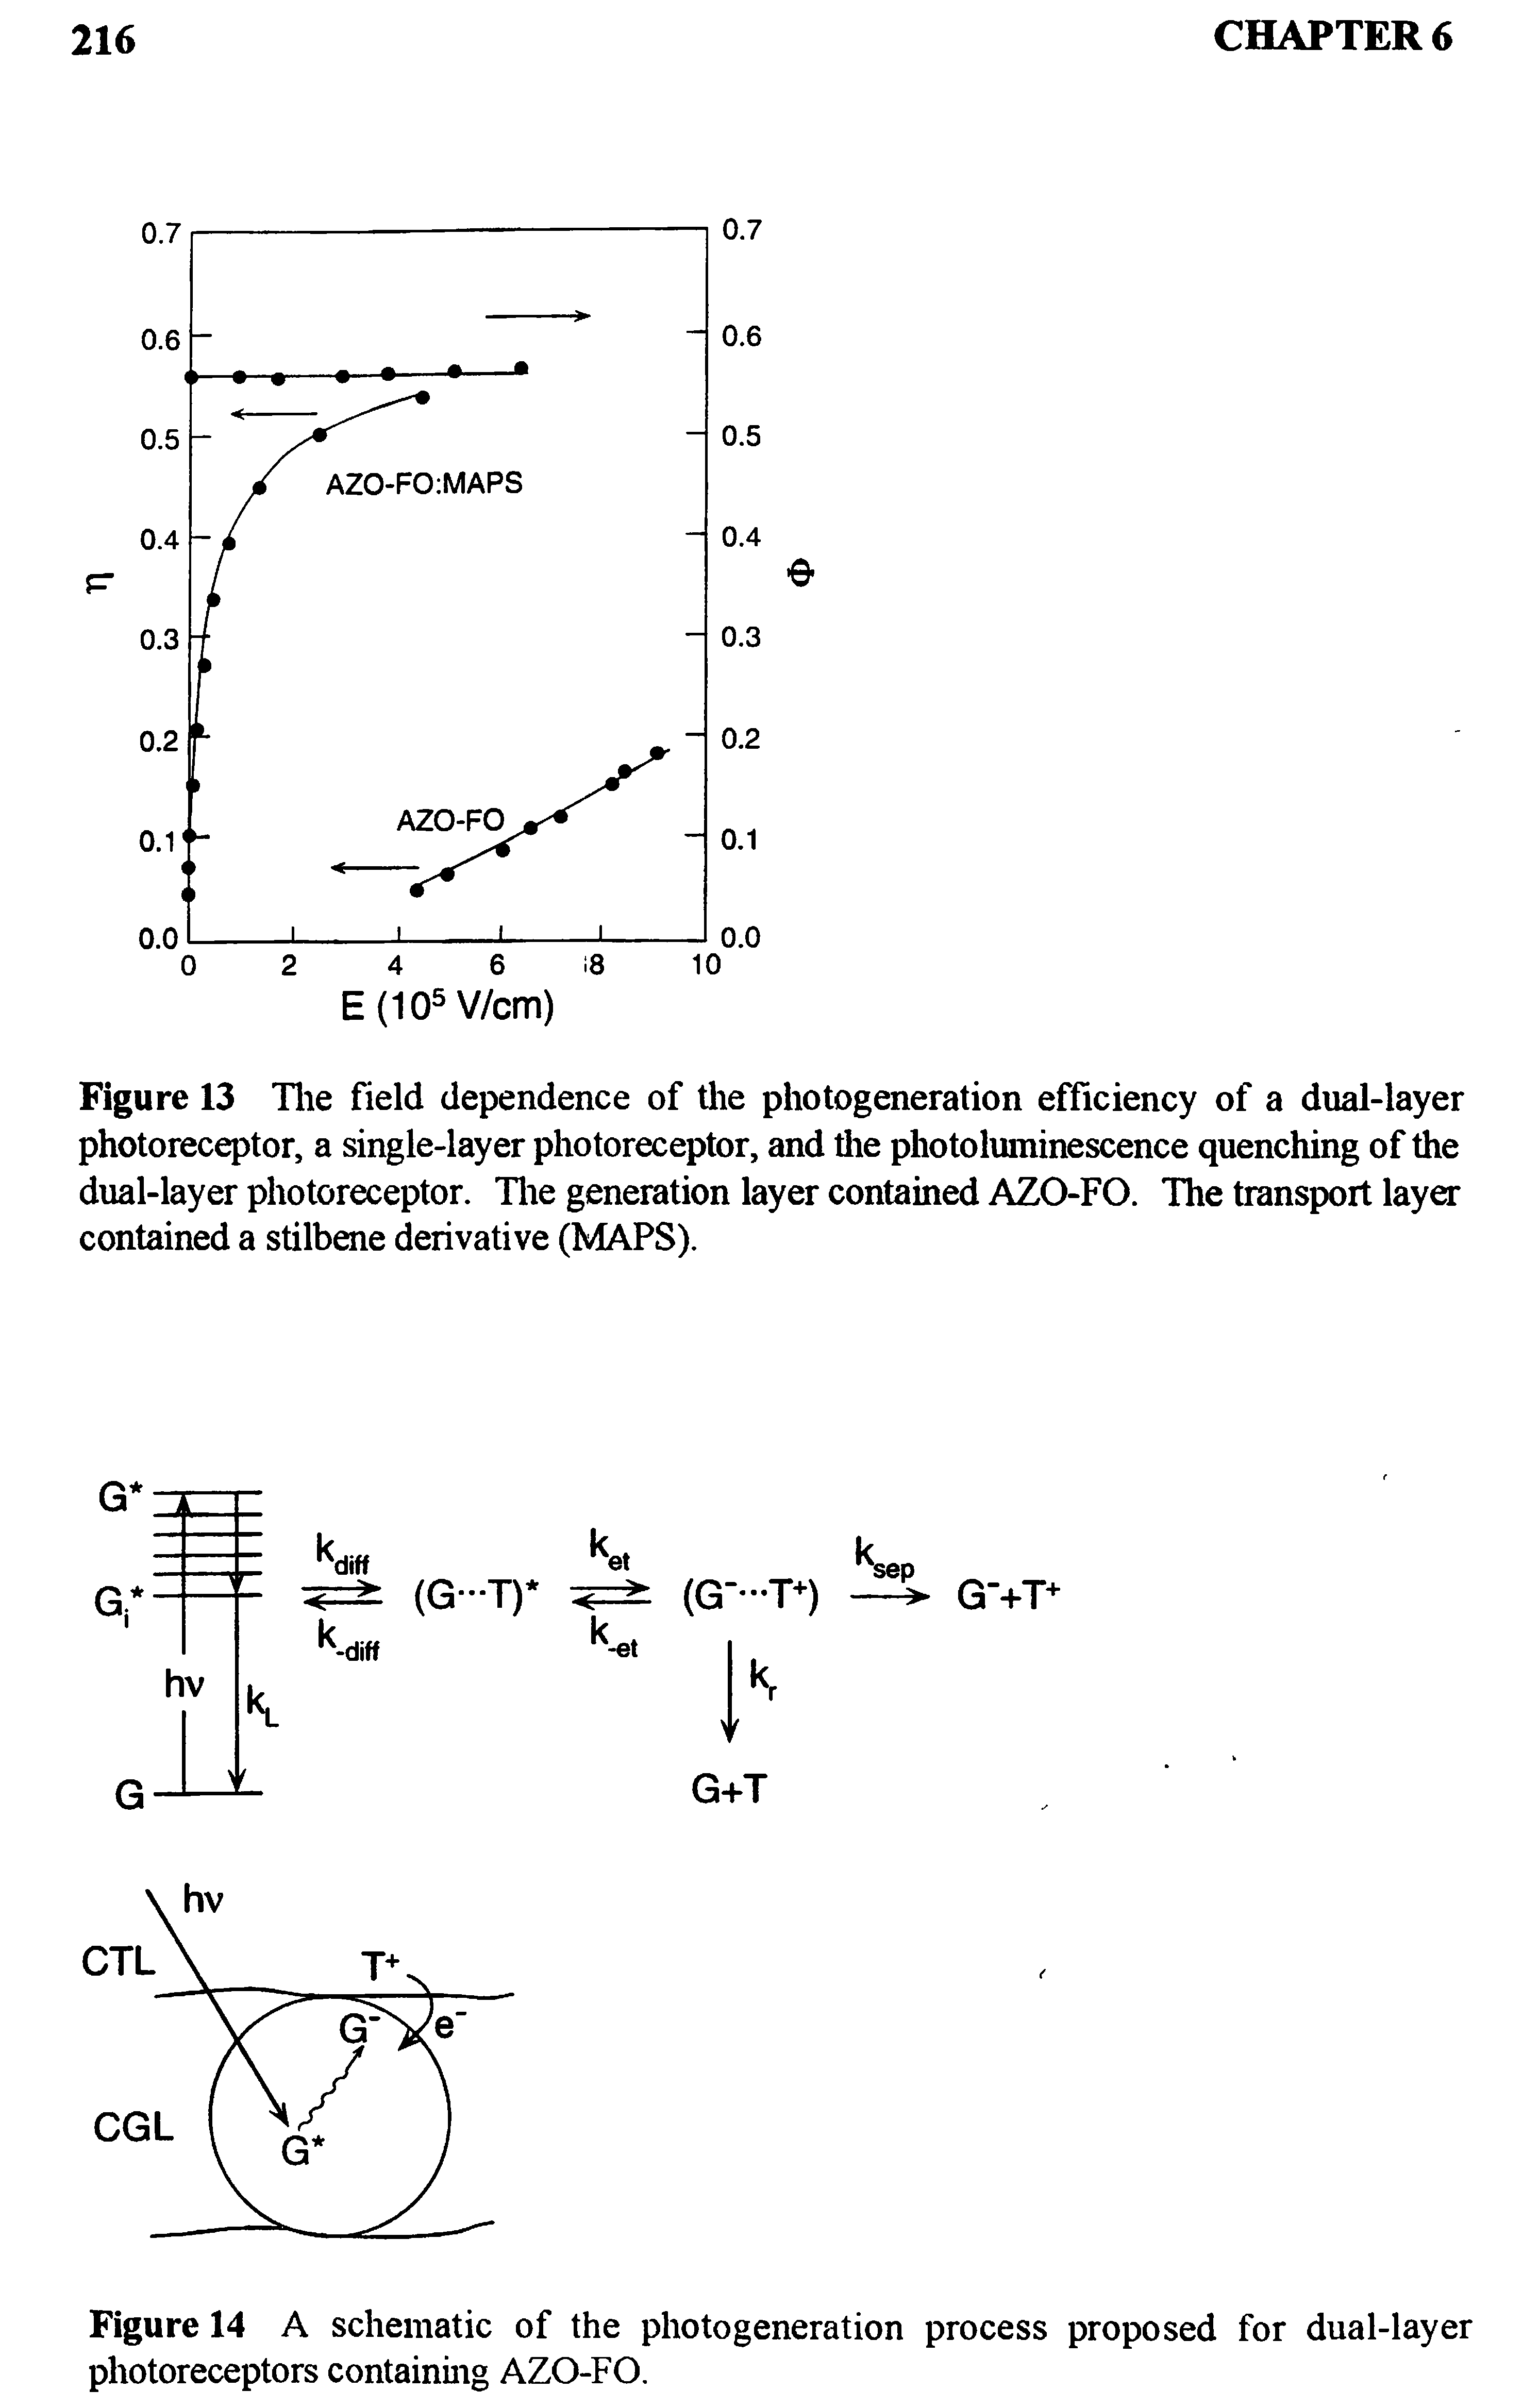 Figure 13 The field dependence of the photogeneration efficiency of a dual-layer photoreceptor, a single-layer photoreceptor, and the photoluminescence quenching of the dual-layer photoreceptor. The generation layer contained AZO-FO. The transport layer contained a stilbene derivative (MAPS).